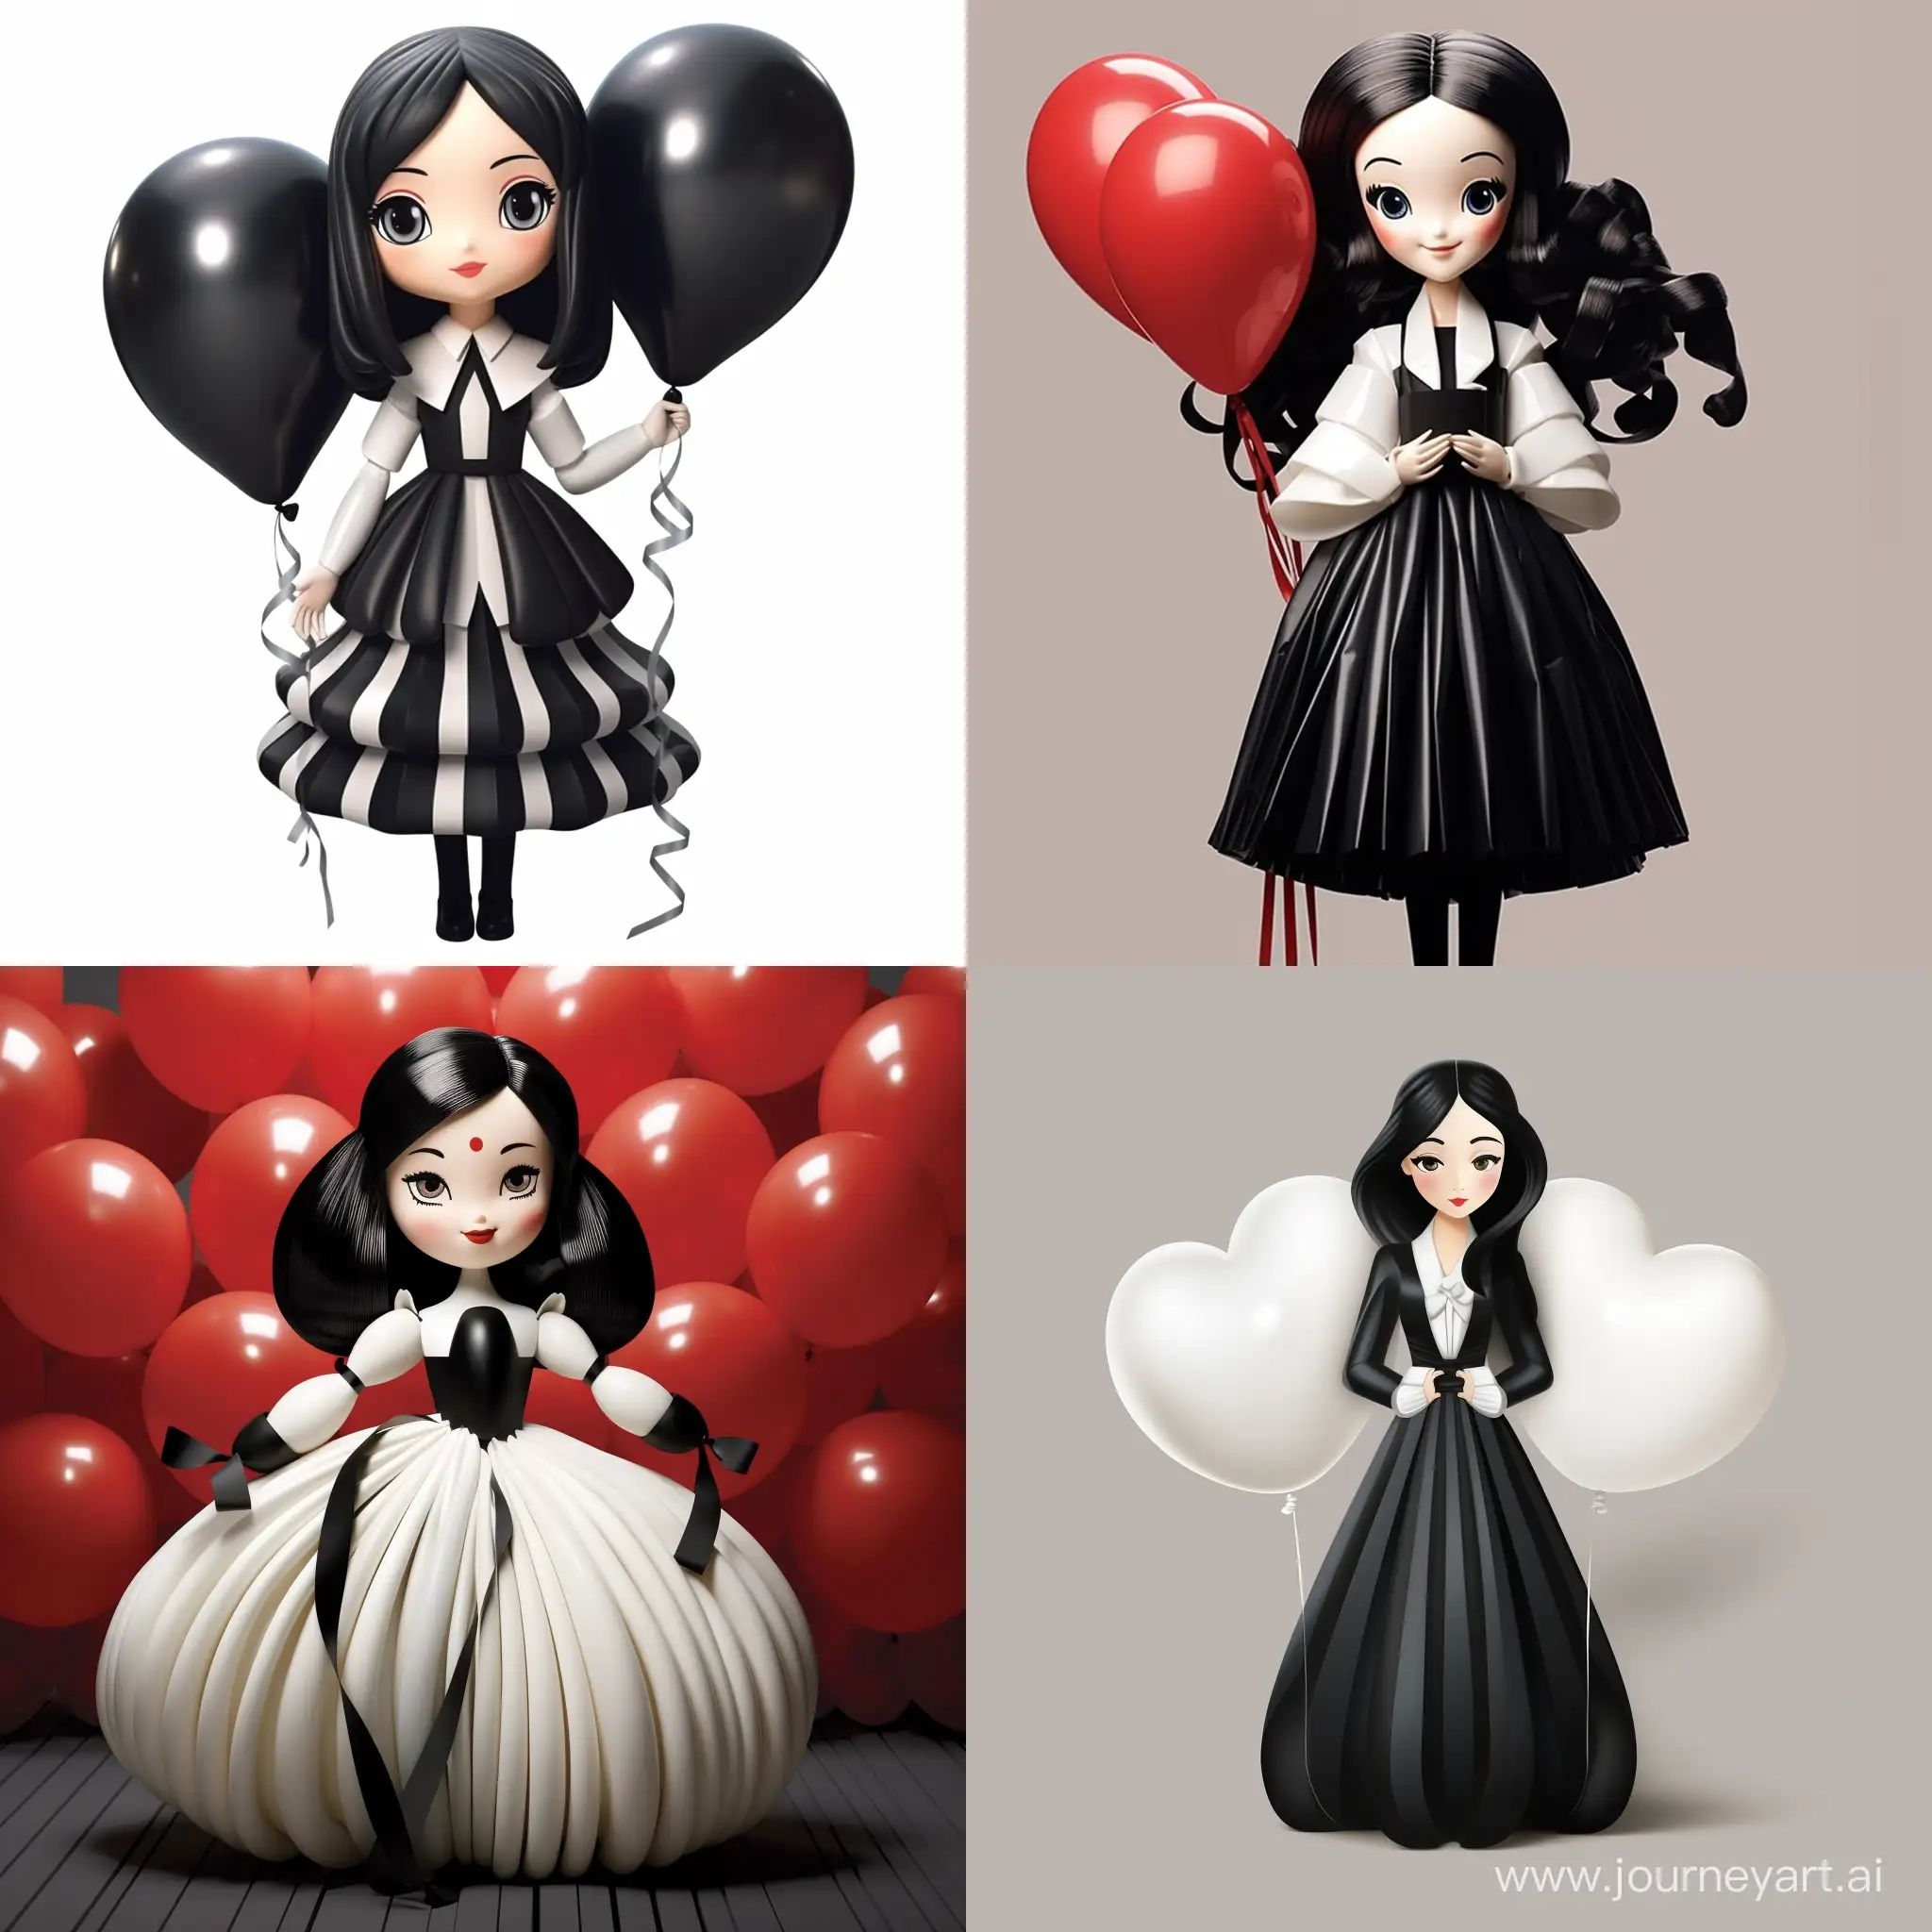 Enchanting-Wooden-Mime-Transformation-Japanese-Girl-in-PixarStyle-Costume-at-Convention